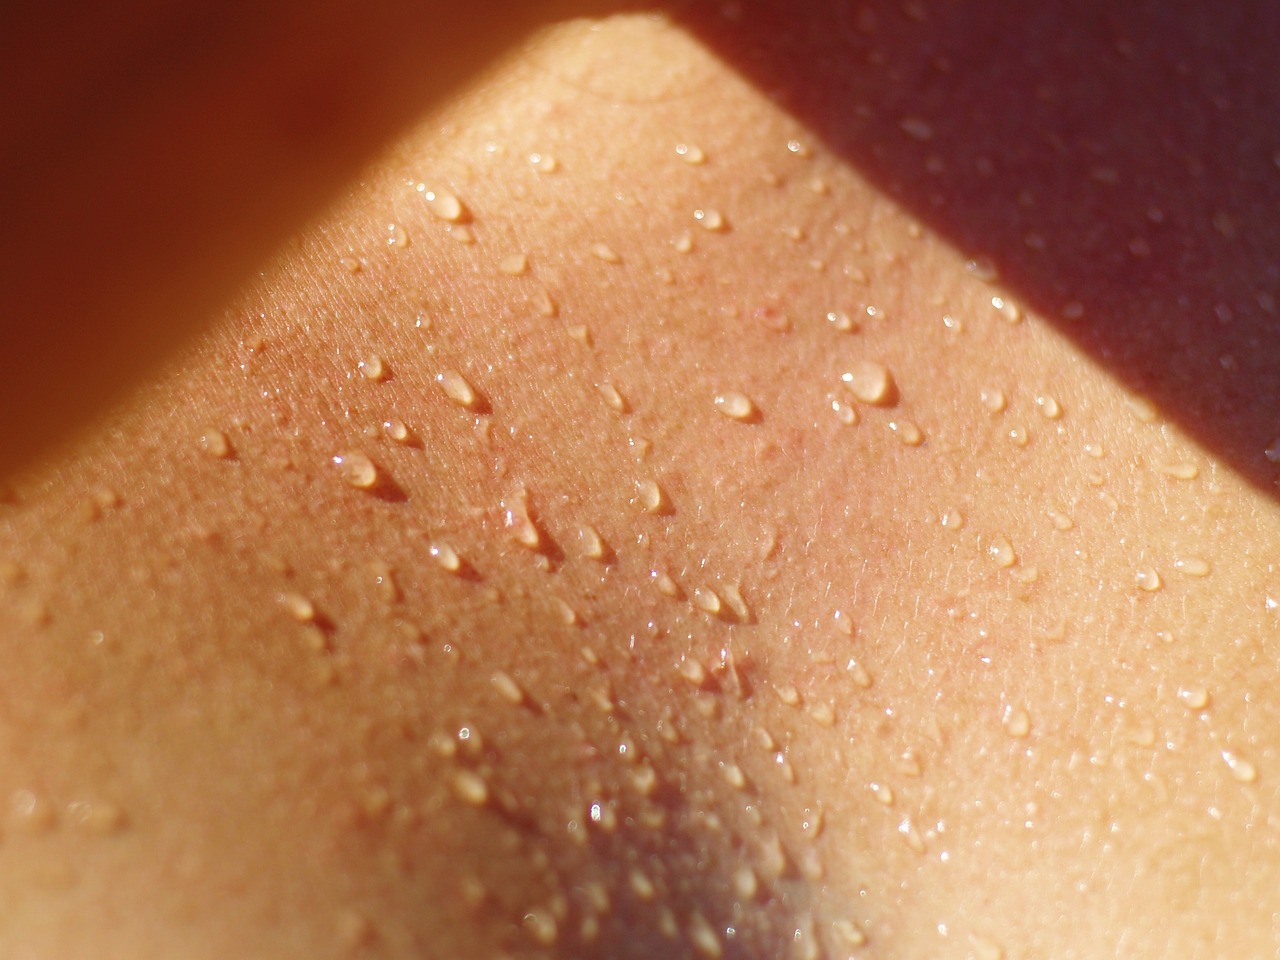 A close up of a person's chest with water droplets on it.